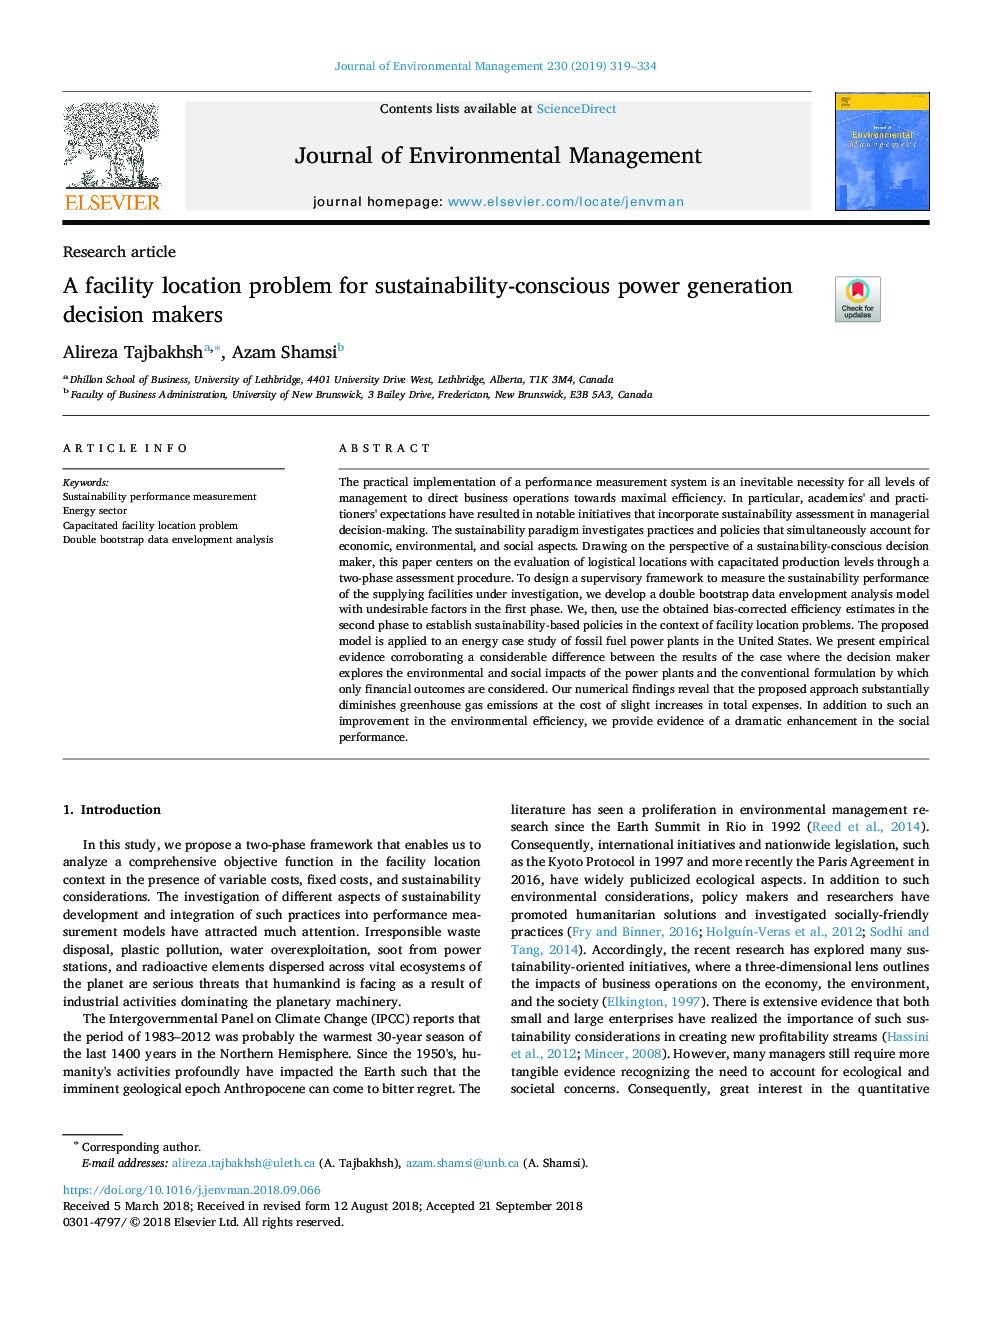 A facility location problem for sustainability-conscious power generation decision makers